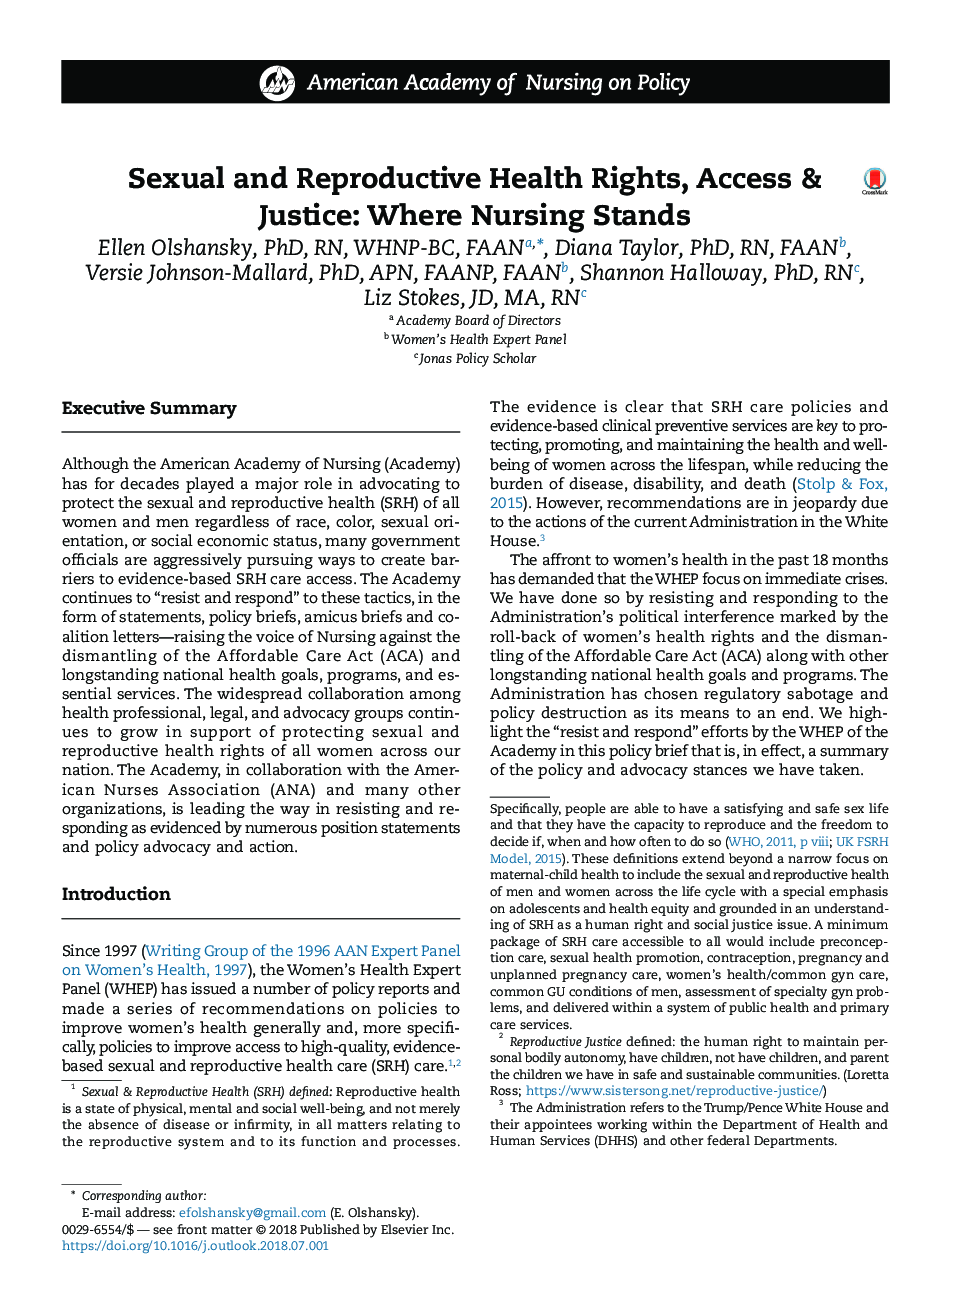 Sexual and Reproductive Health Rights, Access & Justice: Where Nursing Stands